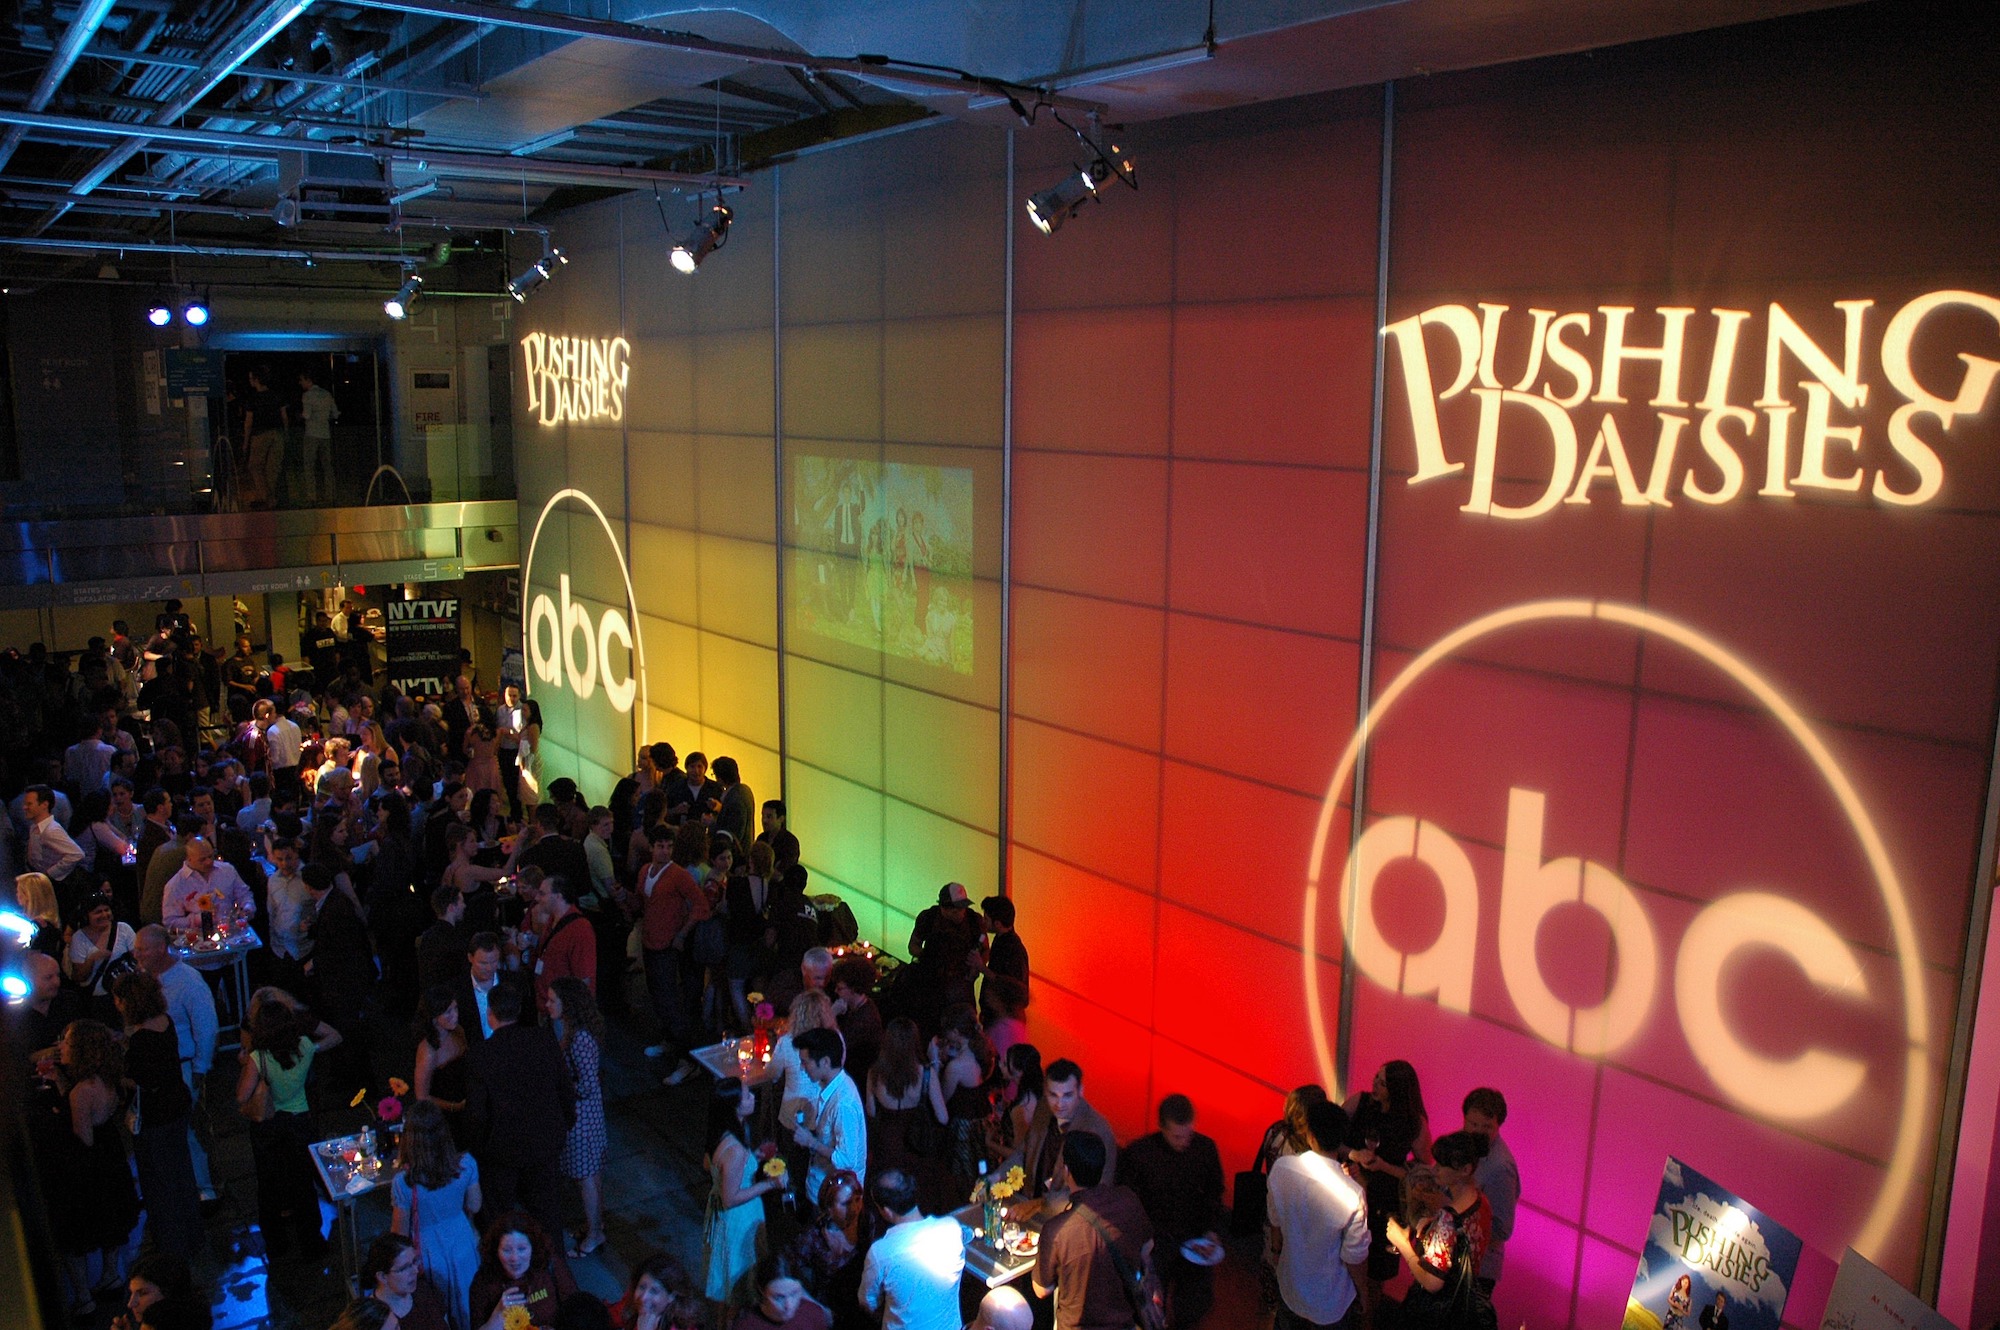 The New York Television Festival Premiere of ABC's 'Pushing Daisies'